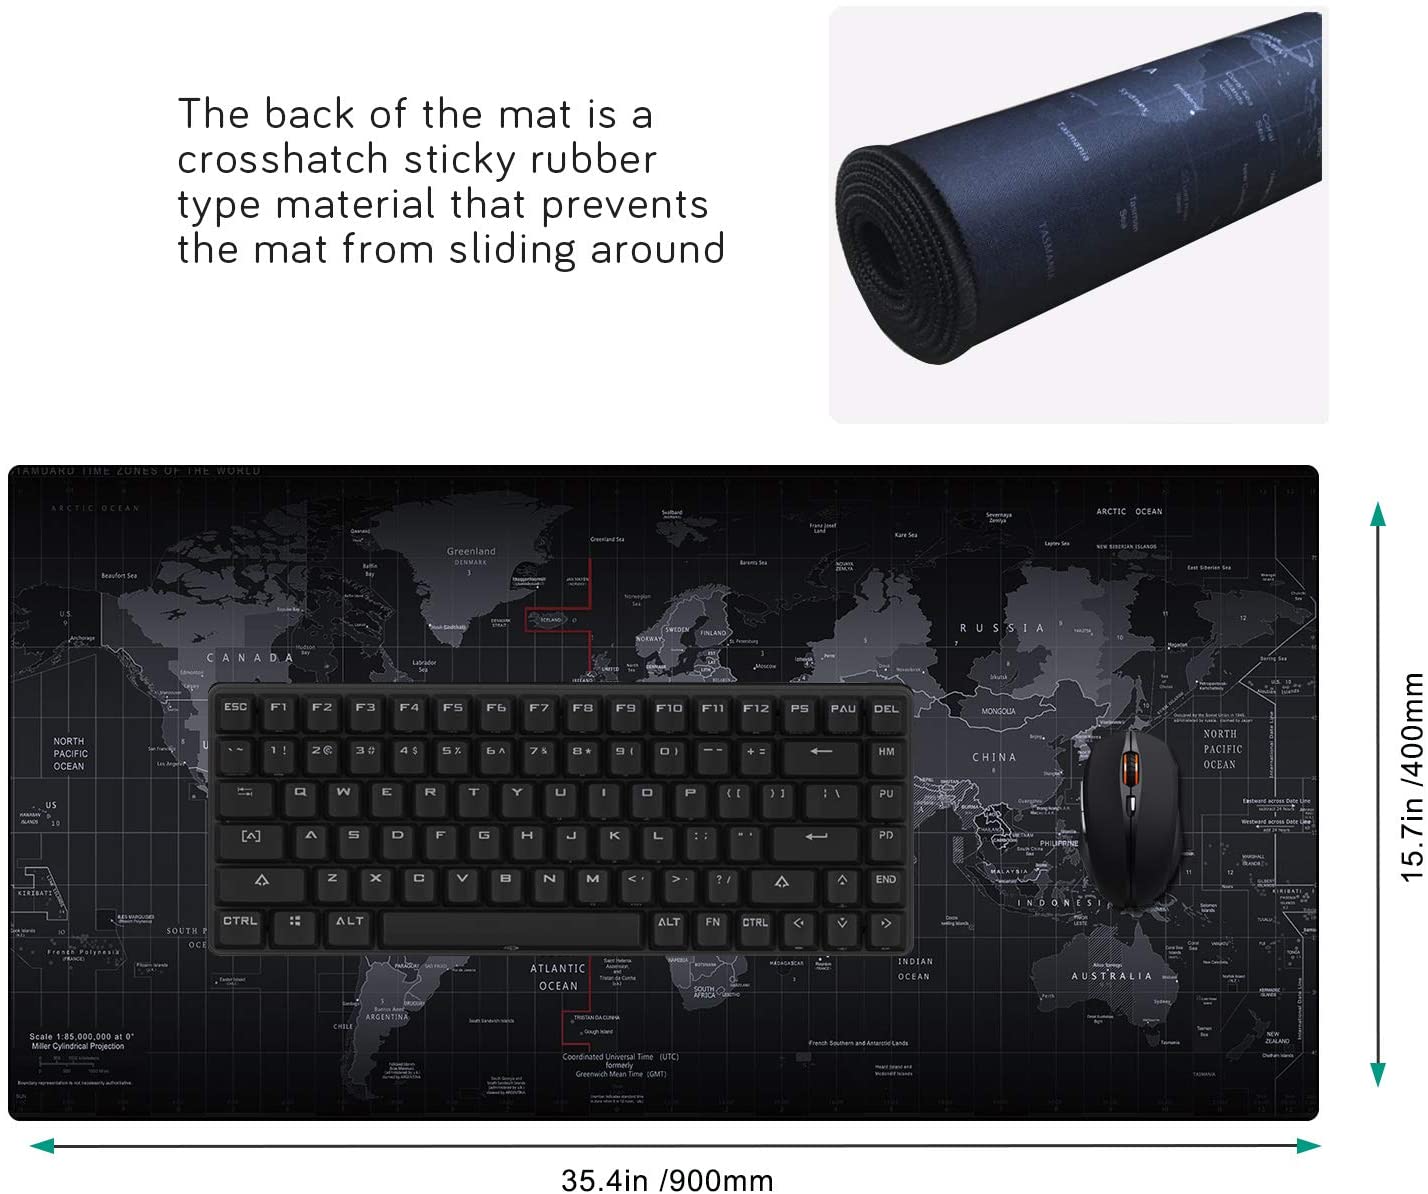 Hukimoyo Gaming Mouse pad extended, waterproof keyboard pad and Desktop mat for Office & Home